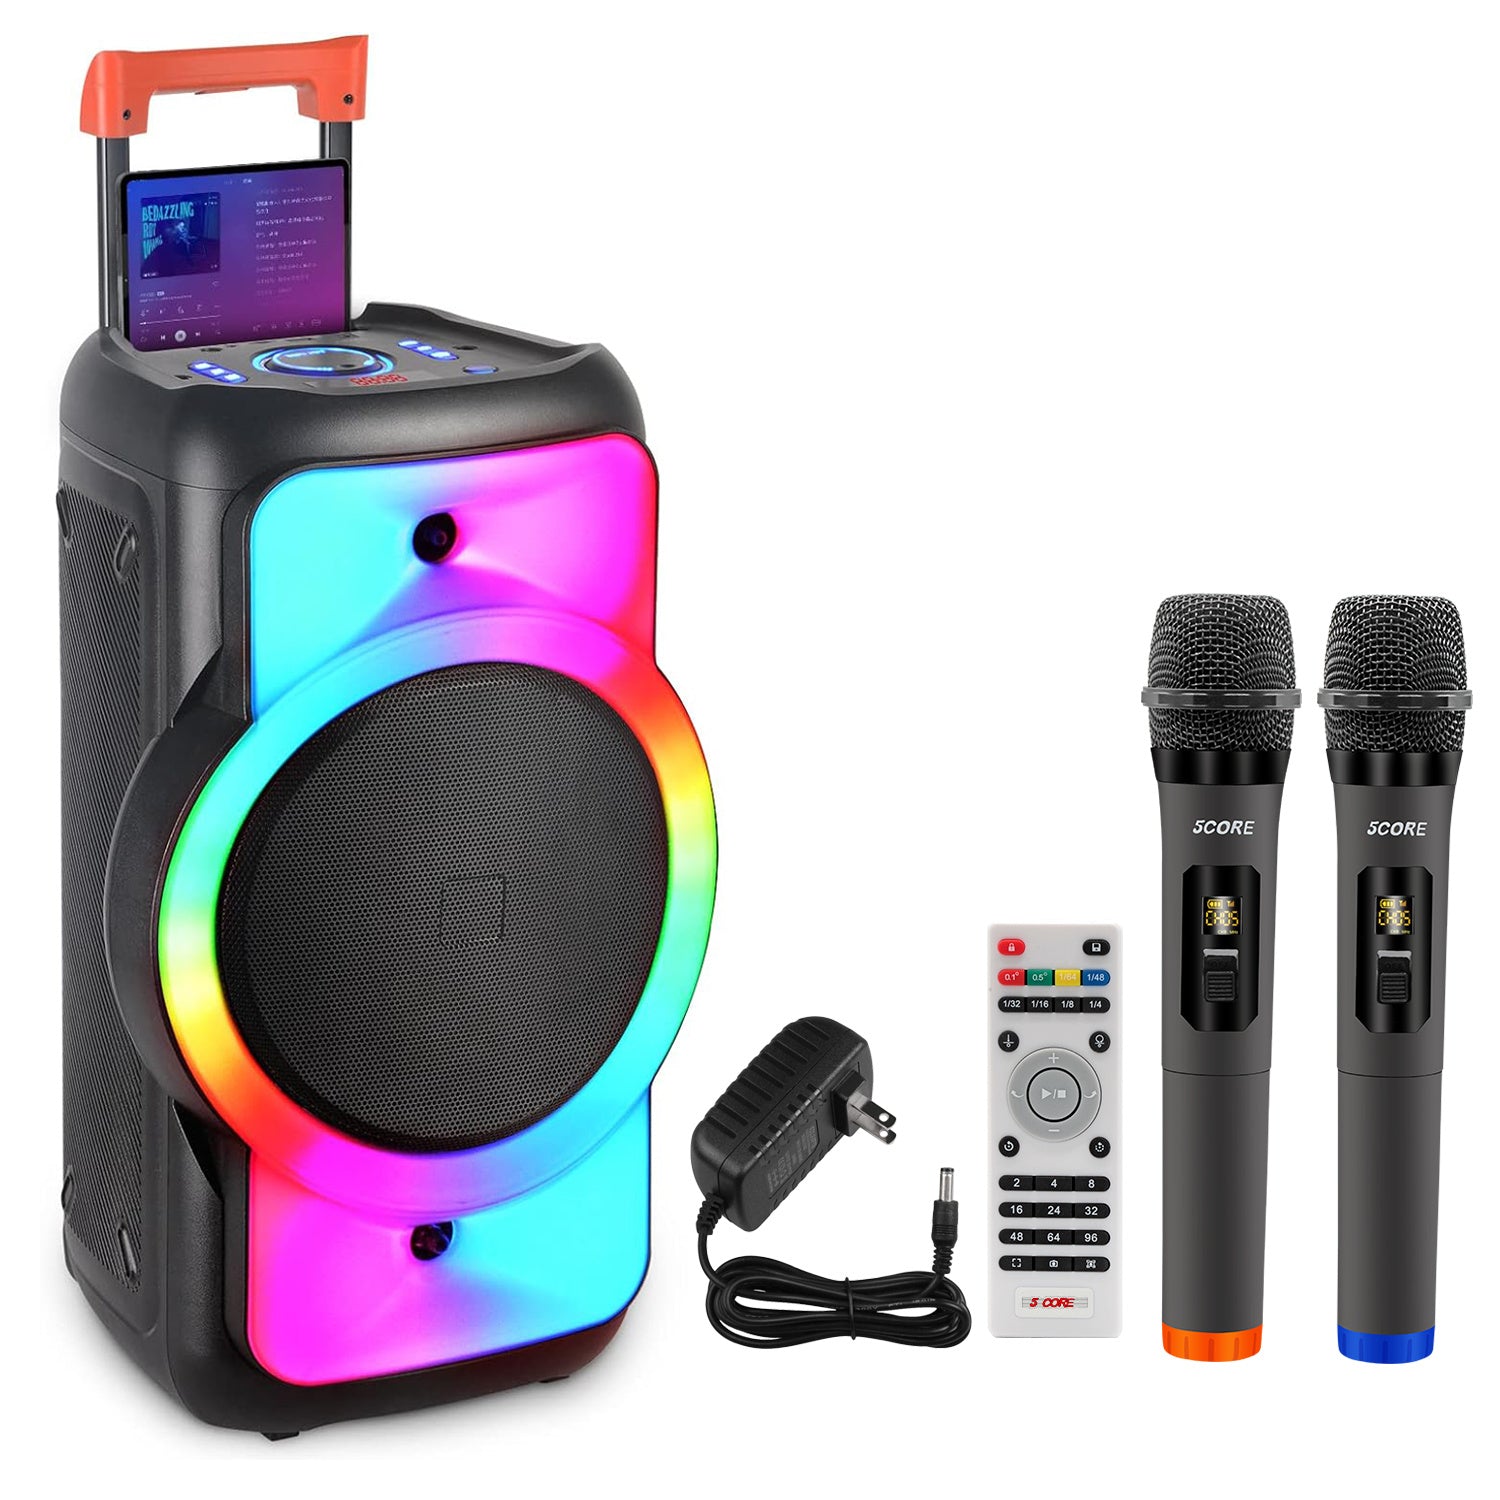 5 Core Bluetooth Speaker Karaoke Machine Portable Singing PA System w Cool DJ Light Support FM + TWS + USB + Memory Card+ AUX + REC Party Speakers Includes Two Wireless Mics -PLB 12X1 2MIC